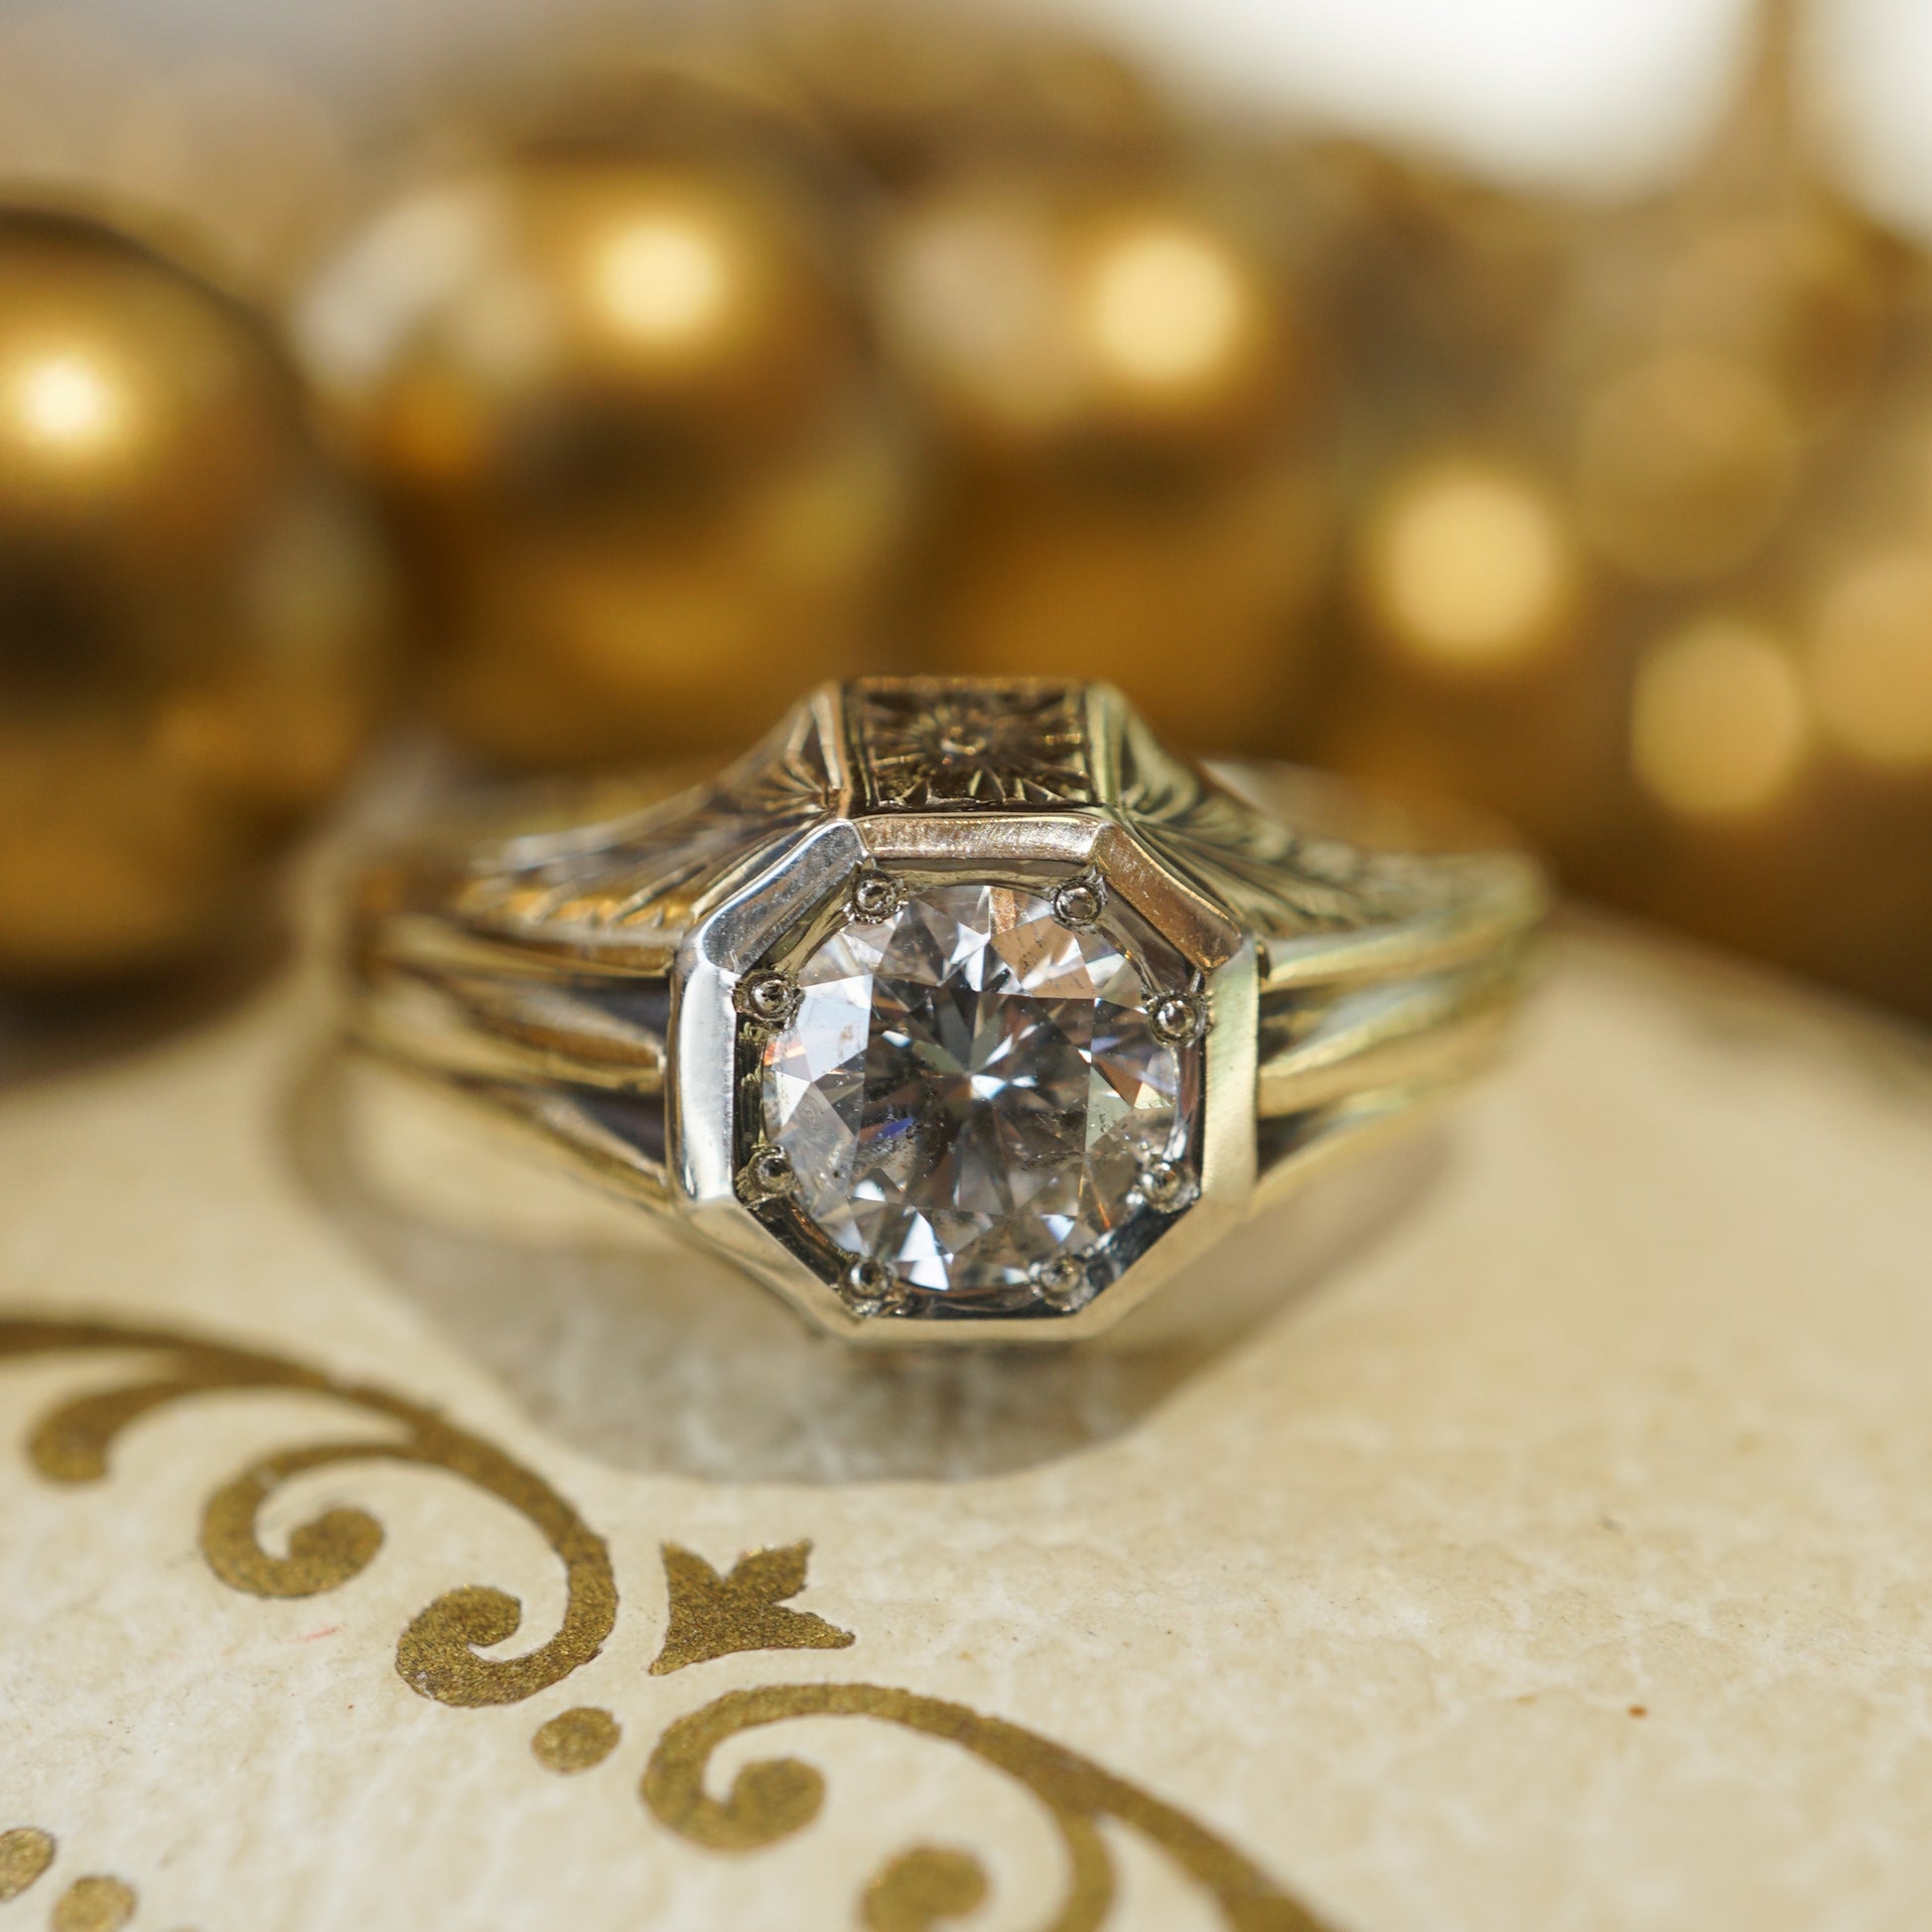 Retro Orange Blossom Diamond Engagement Ring in 14k Yellow GoldComposition: 14 Karat Yellow GoldRing Size: 6Total Diamond Weight: .71 ctTotal Gram Weight: 4.8 gInscription: From Hannah To Mother, 14